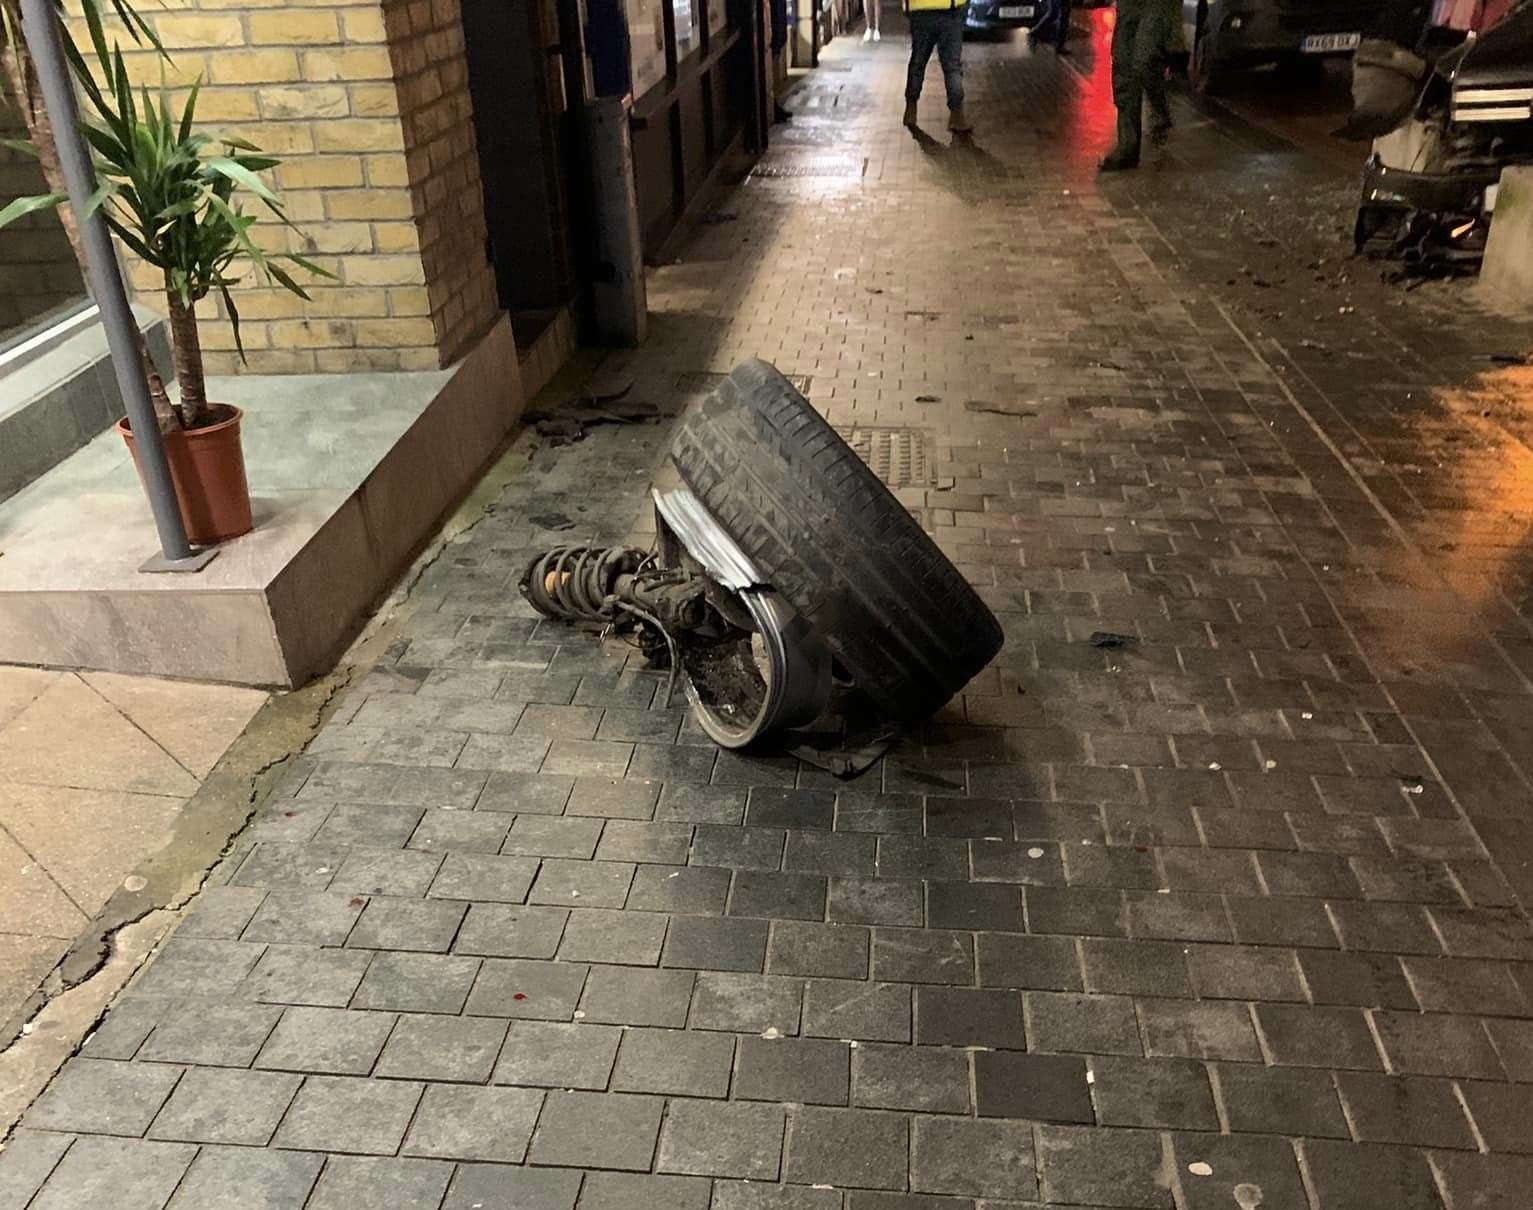 One wheel ended up several feet away on the pavement. Photo: Cheryl Whybrow